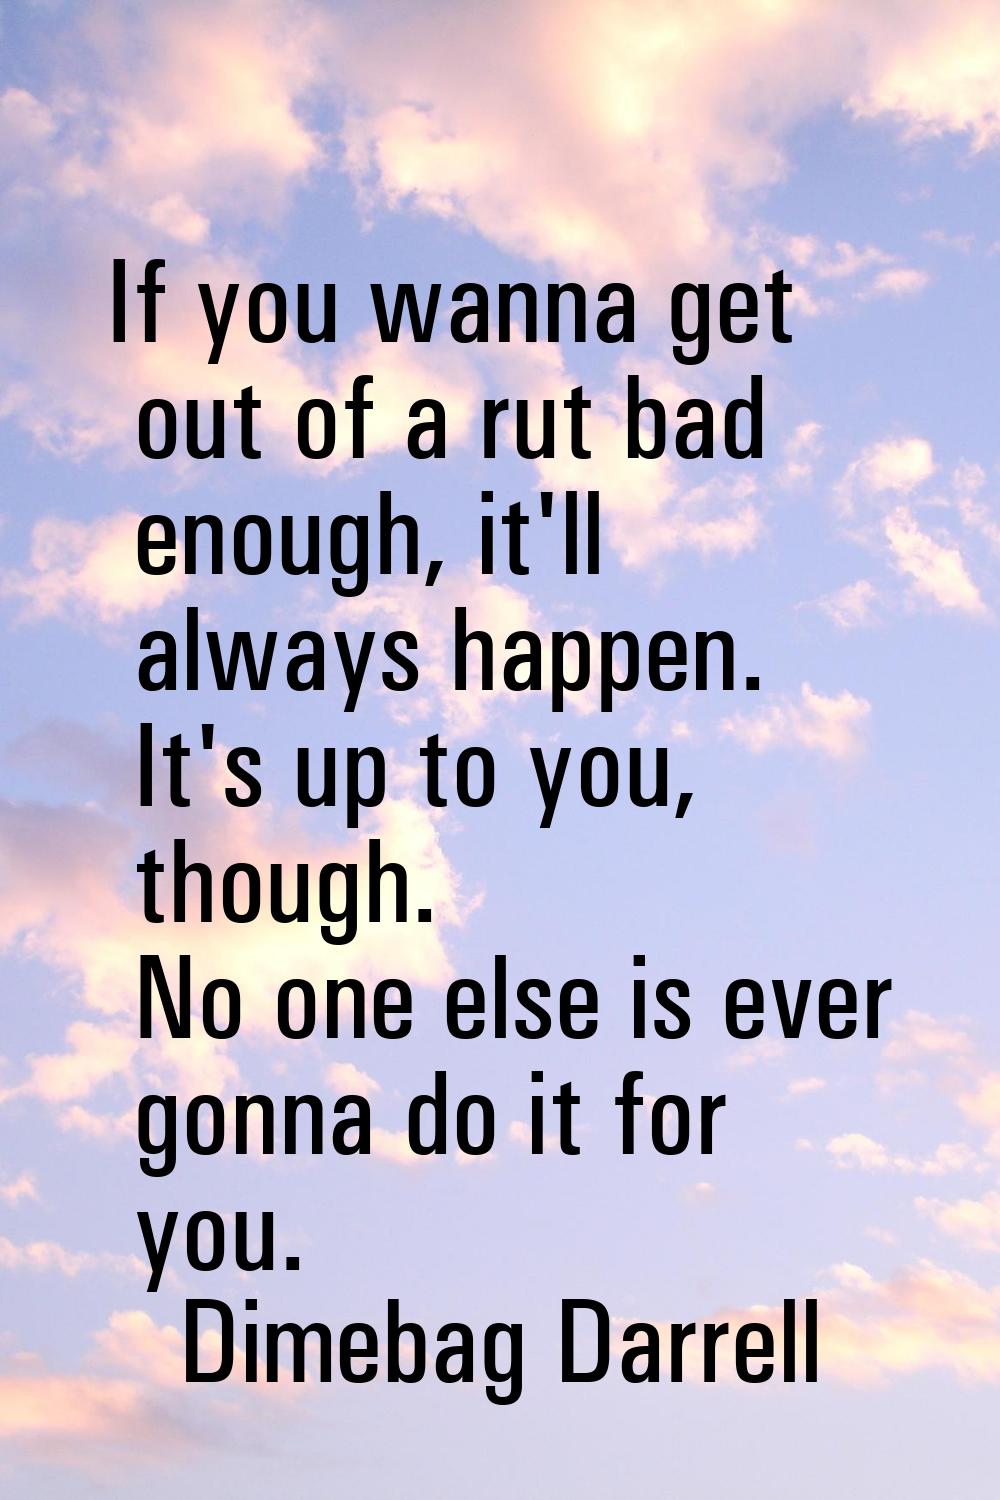 If you wanna get out of a rut bad enough, it'll always happen. It's up to you, though. No one else 